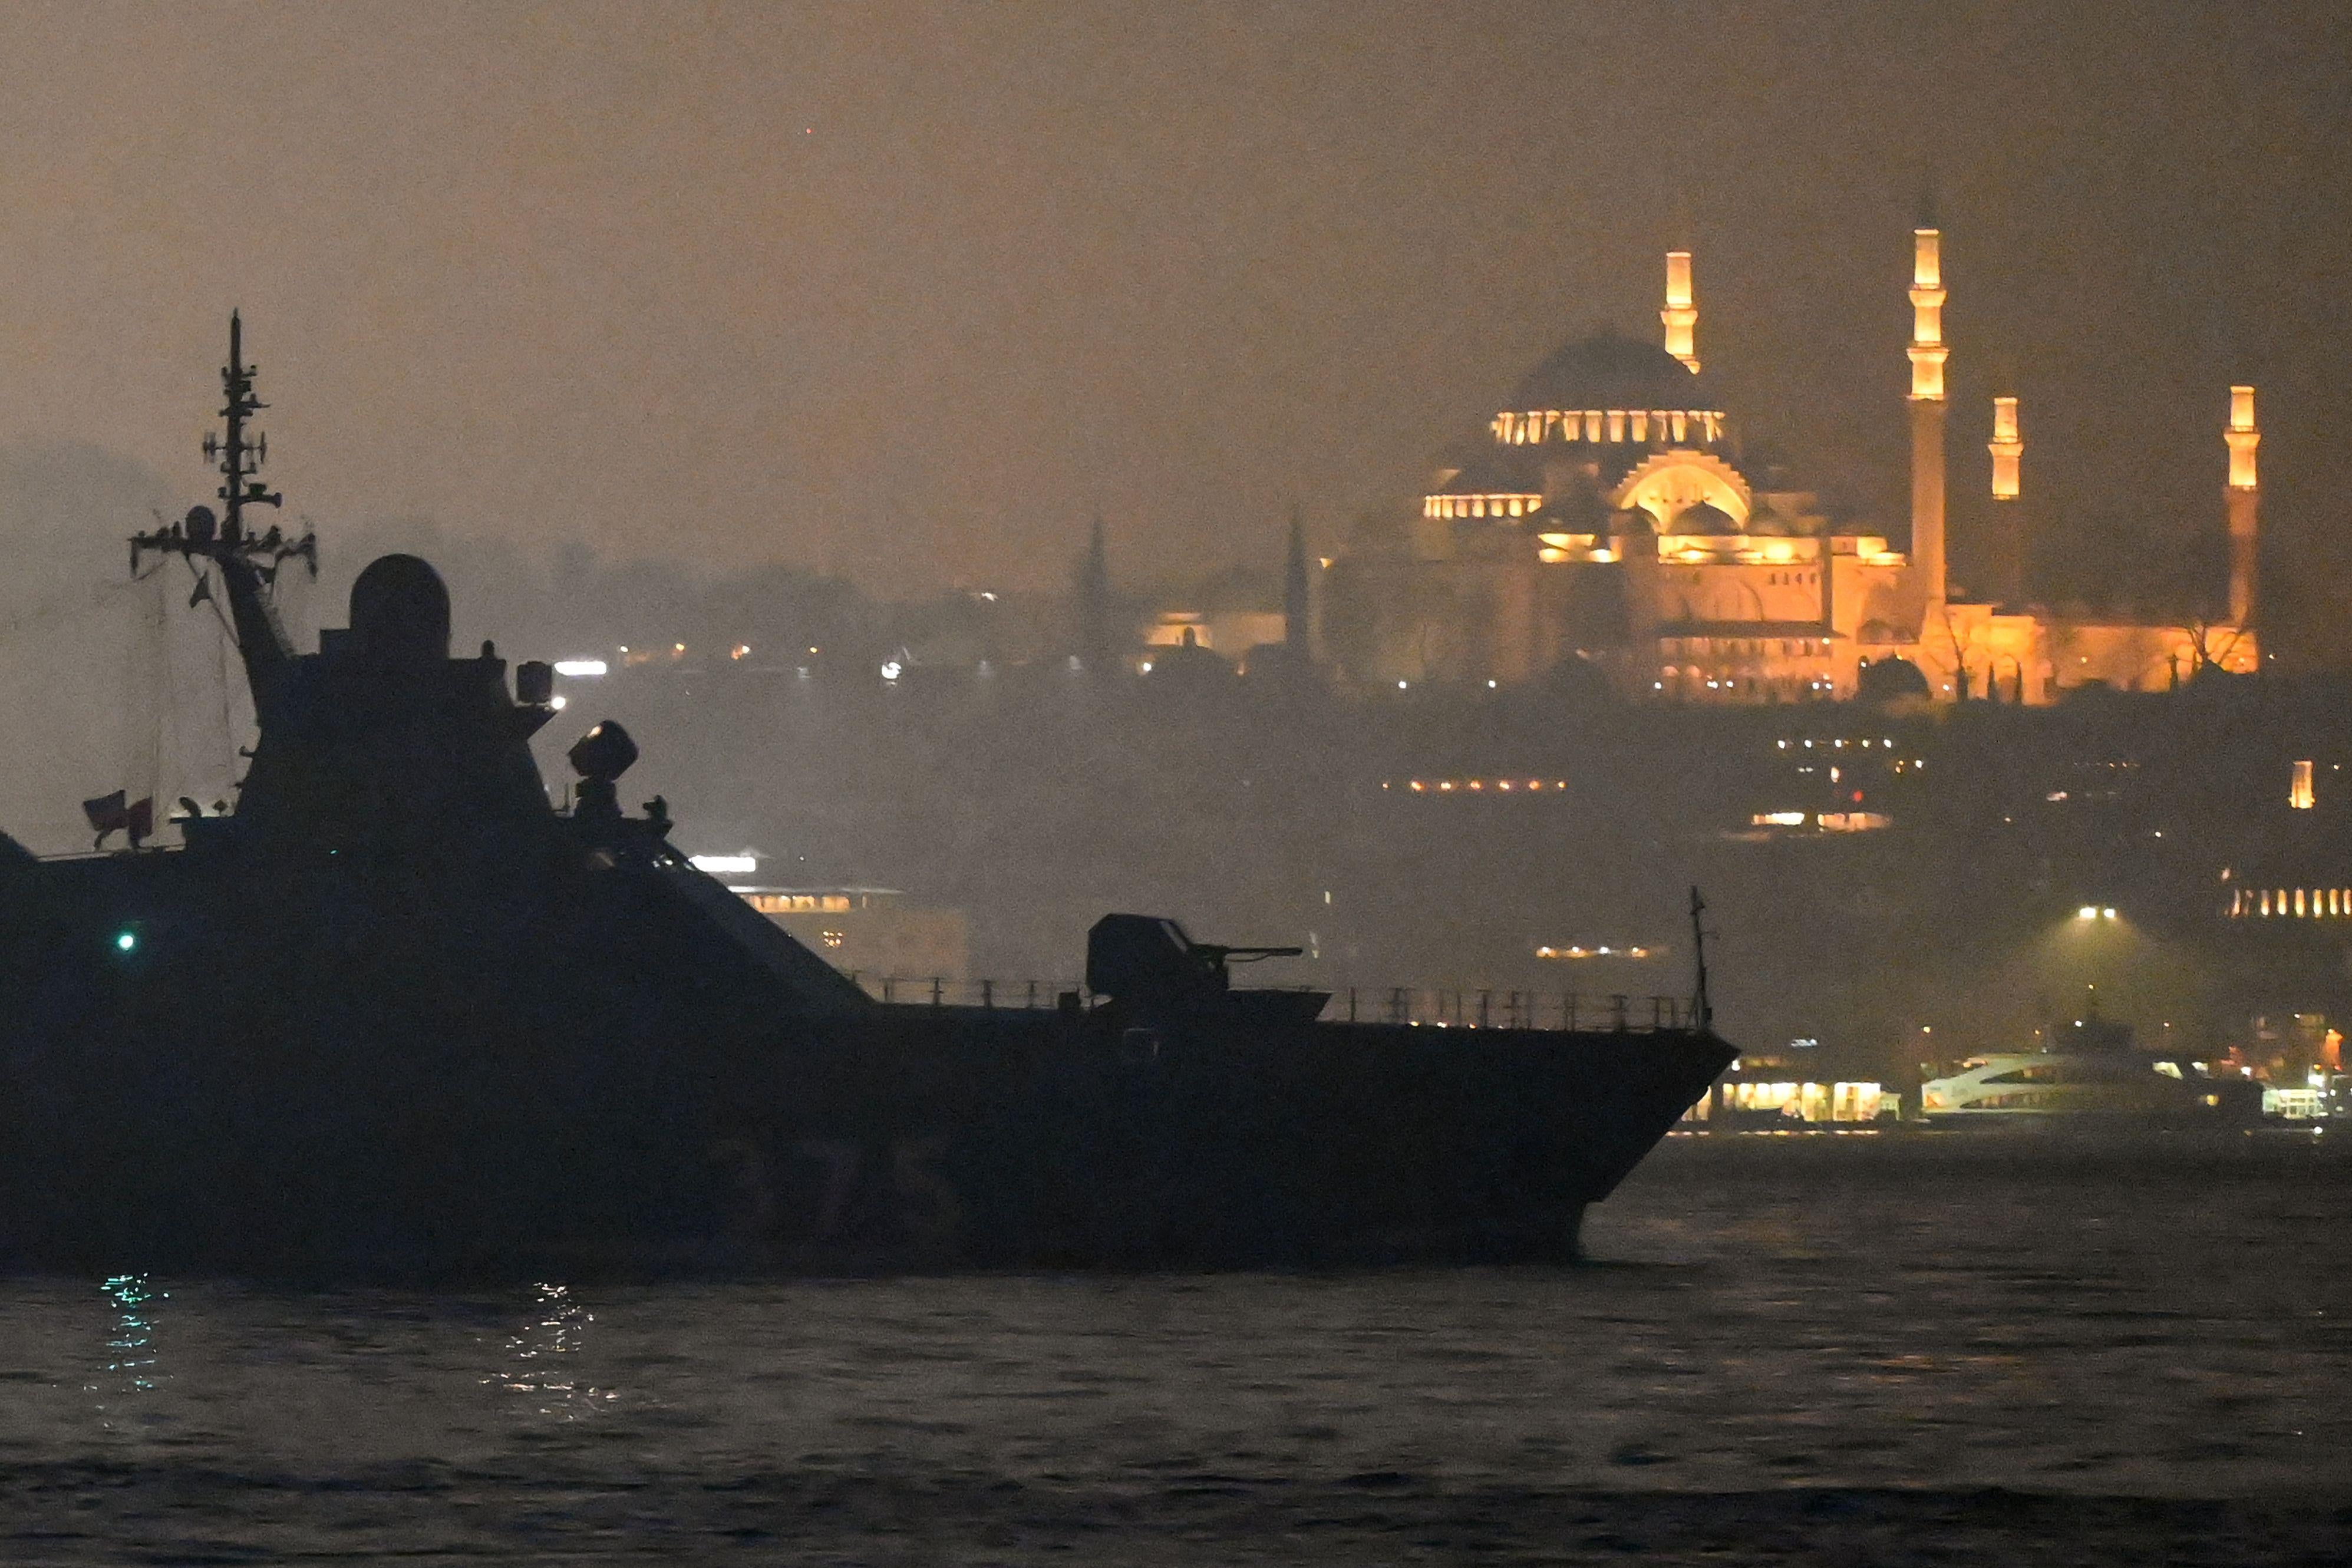 A beautiful mosque lit up as a warship sails by.